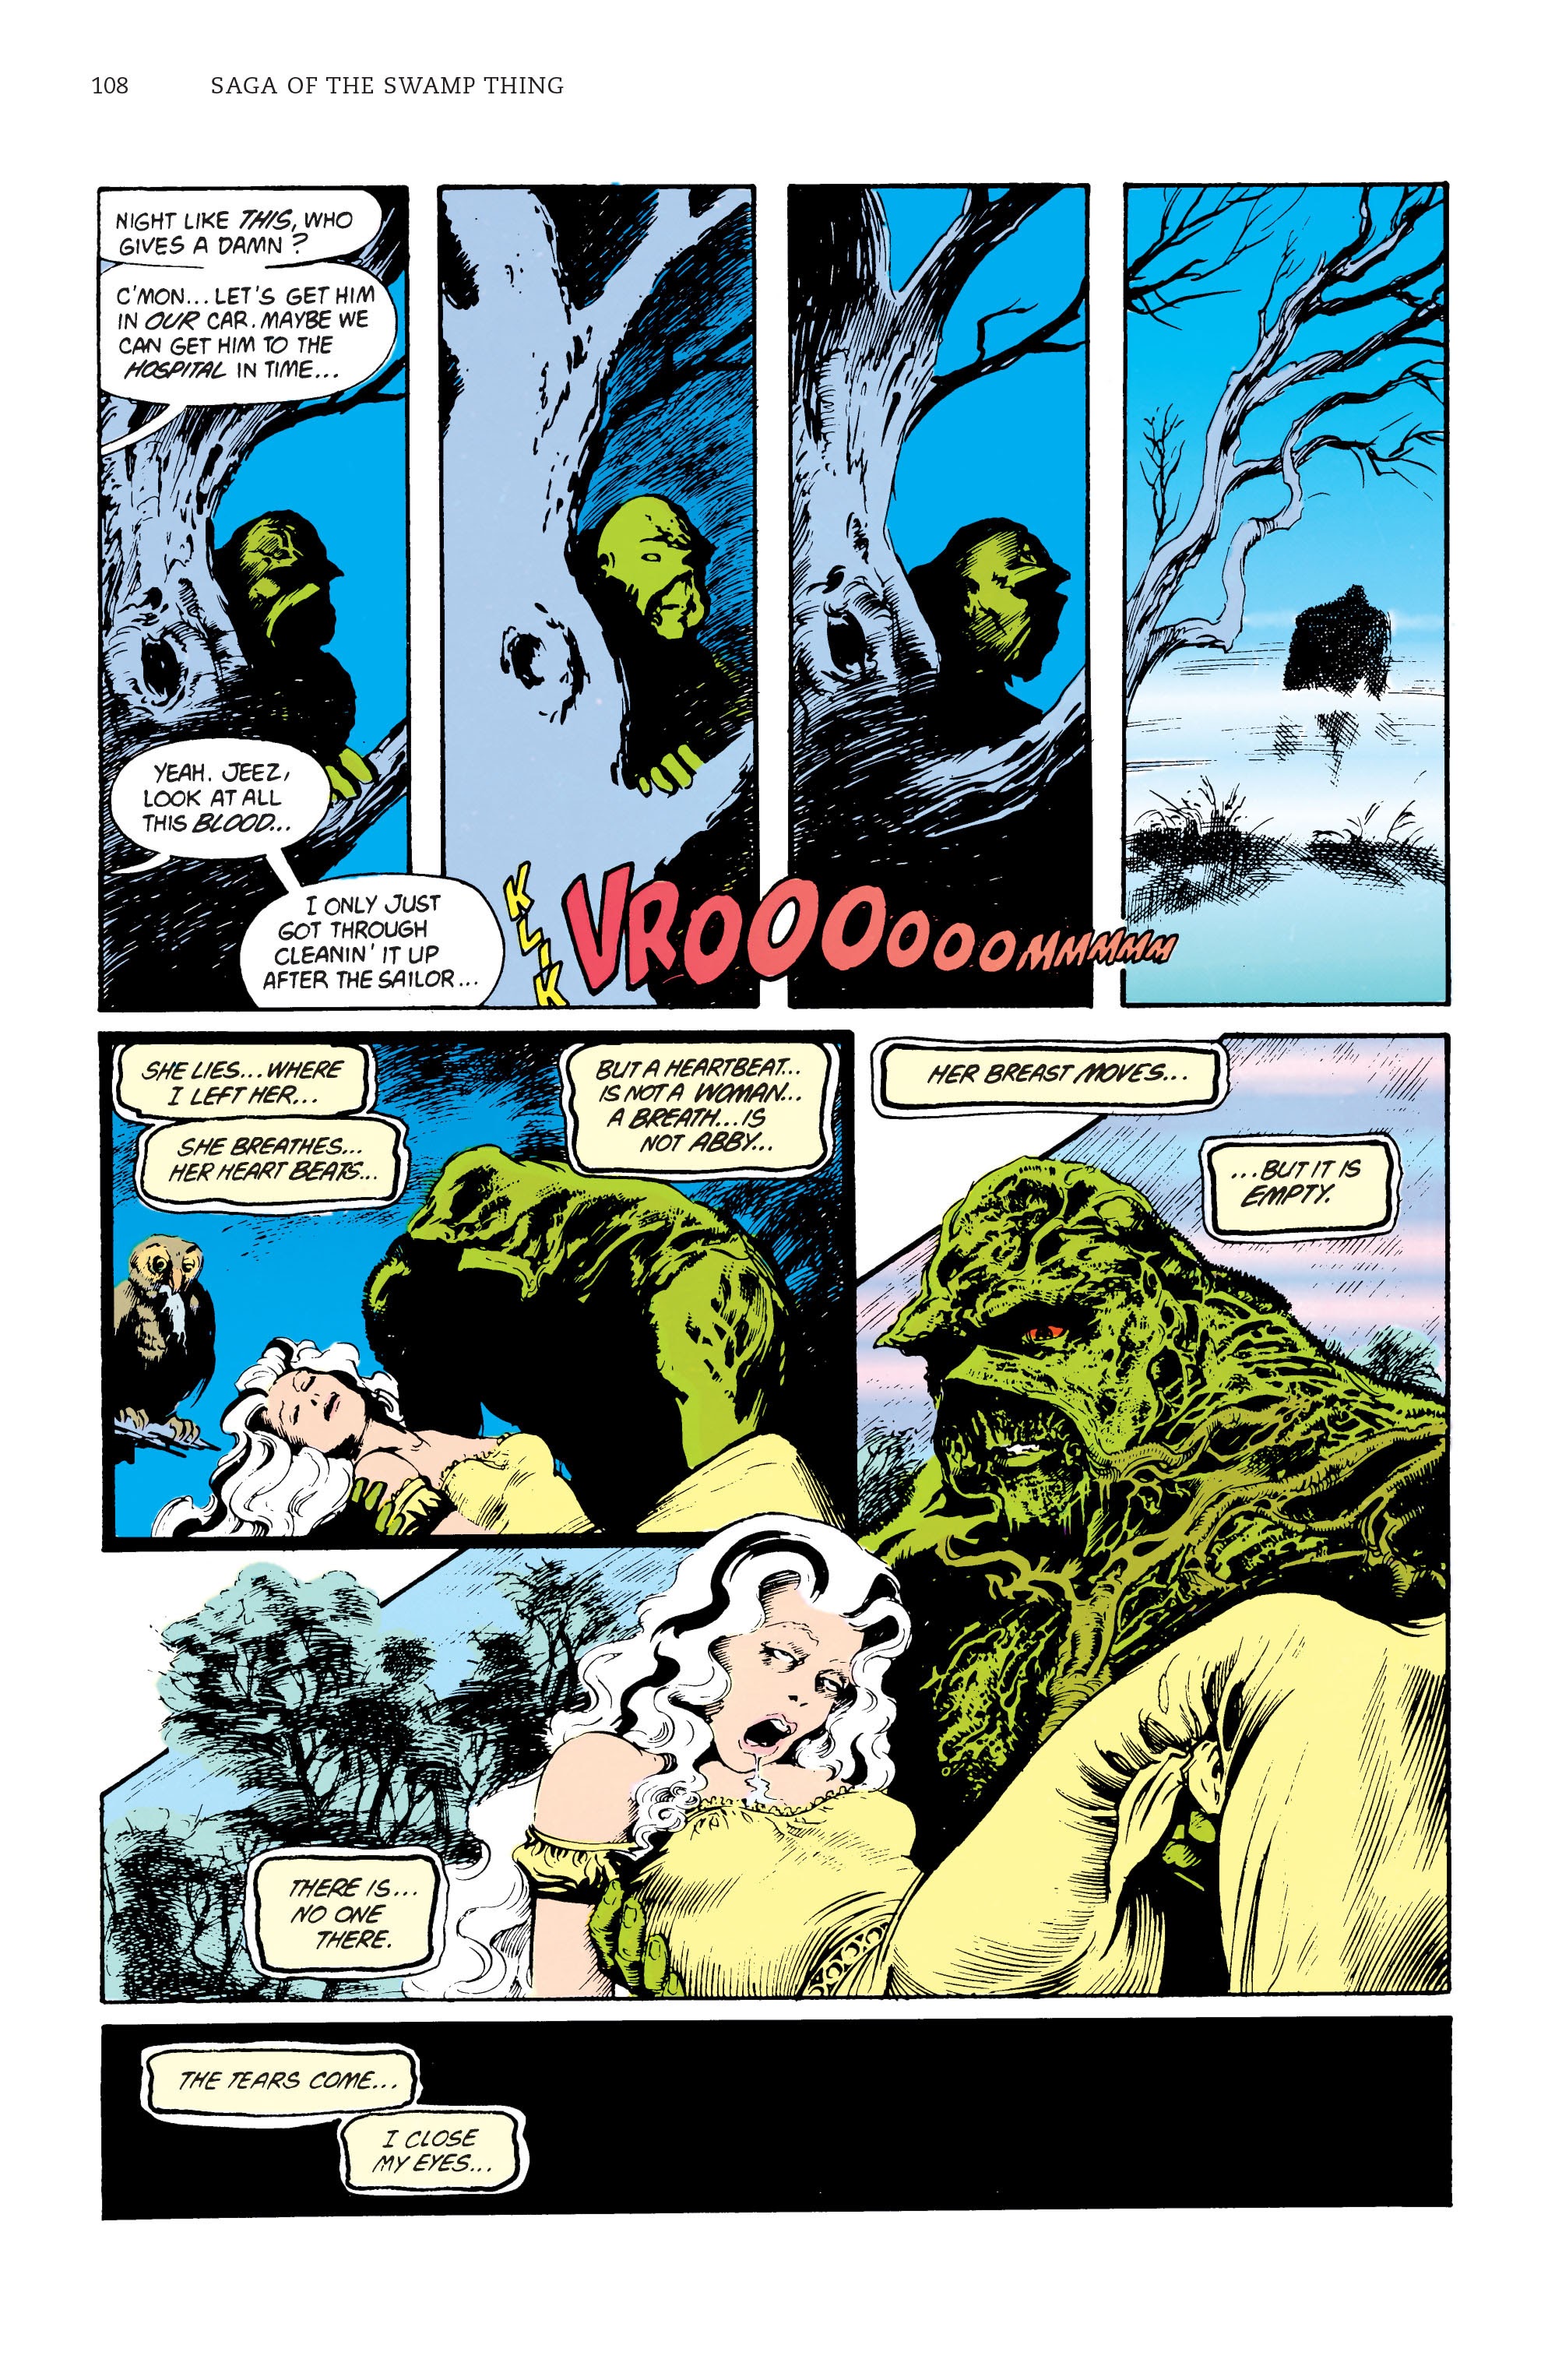 Read online Saga of the Swamp Thing comic -  Issue # TPB 2 (Part 2) - 6